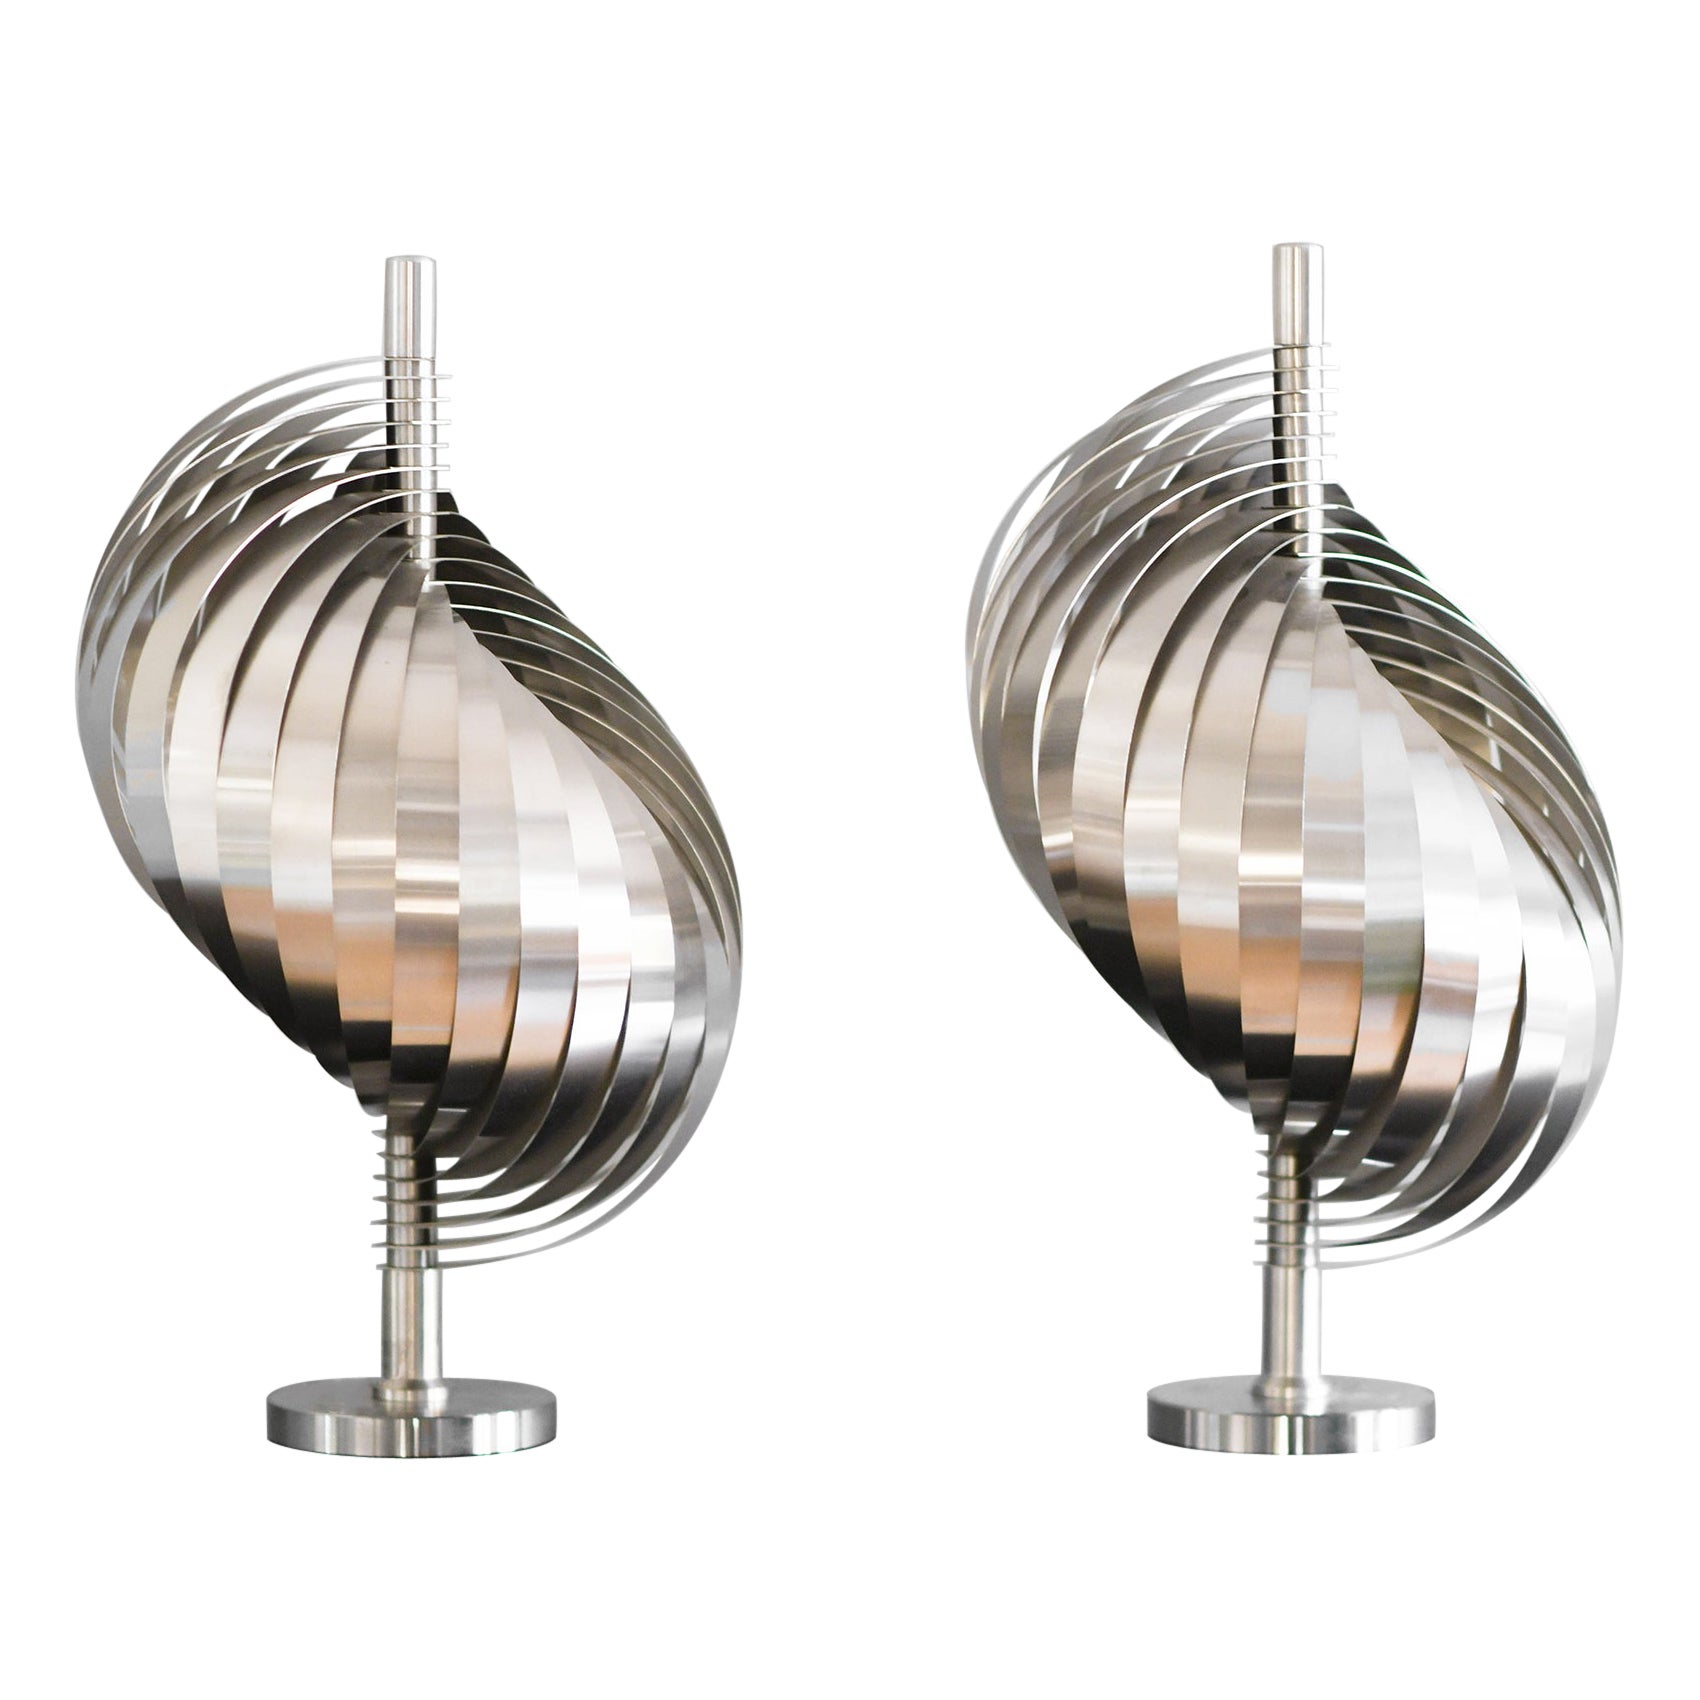 Pair of Table Lamps by Henri Mathieu with Structure in Steel and Aluminum, 1970 For Sale